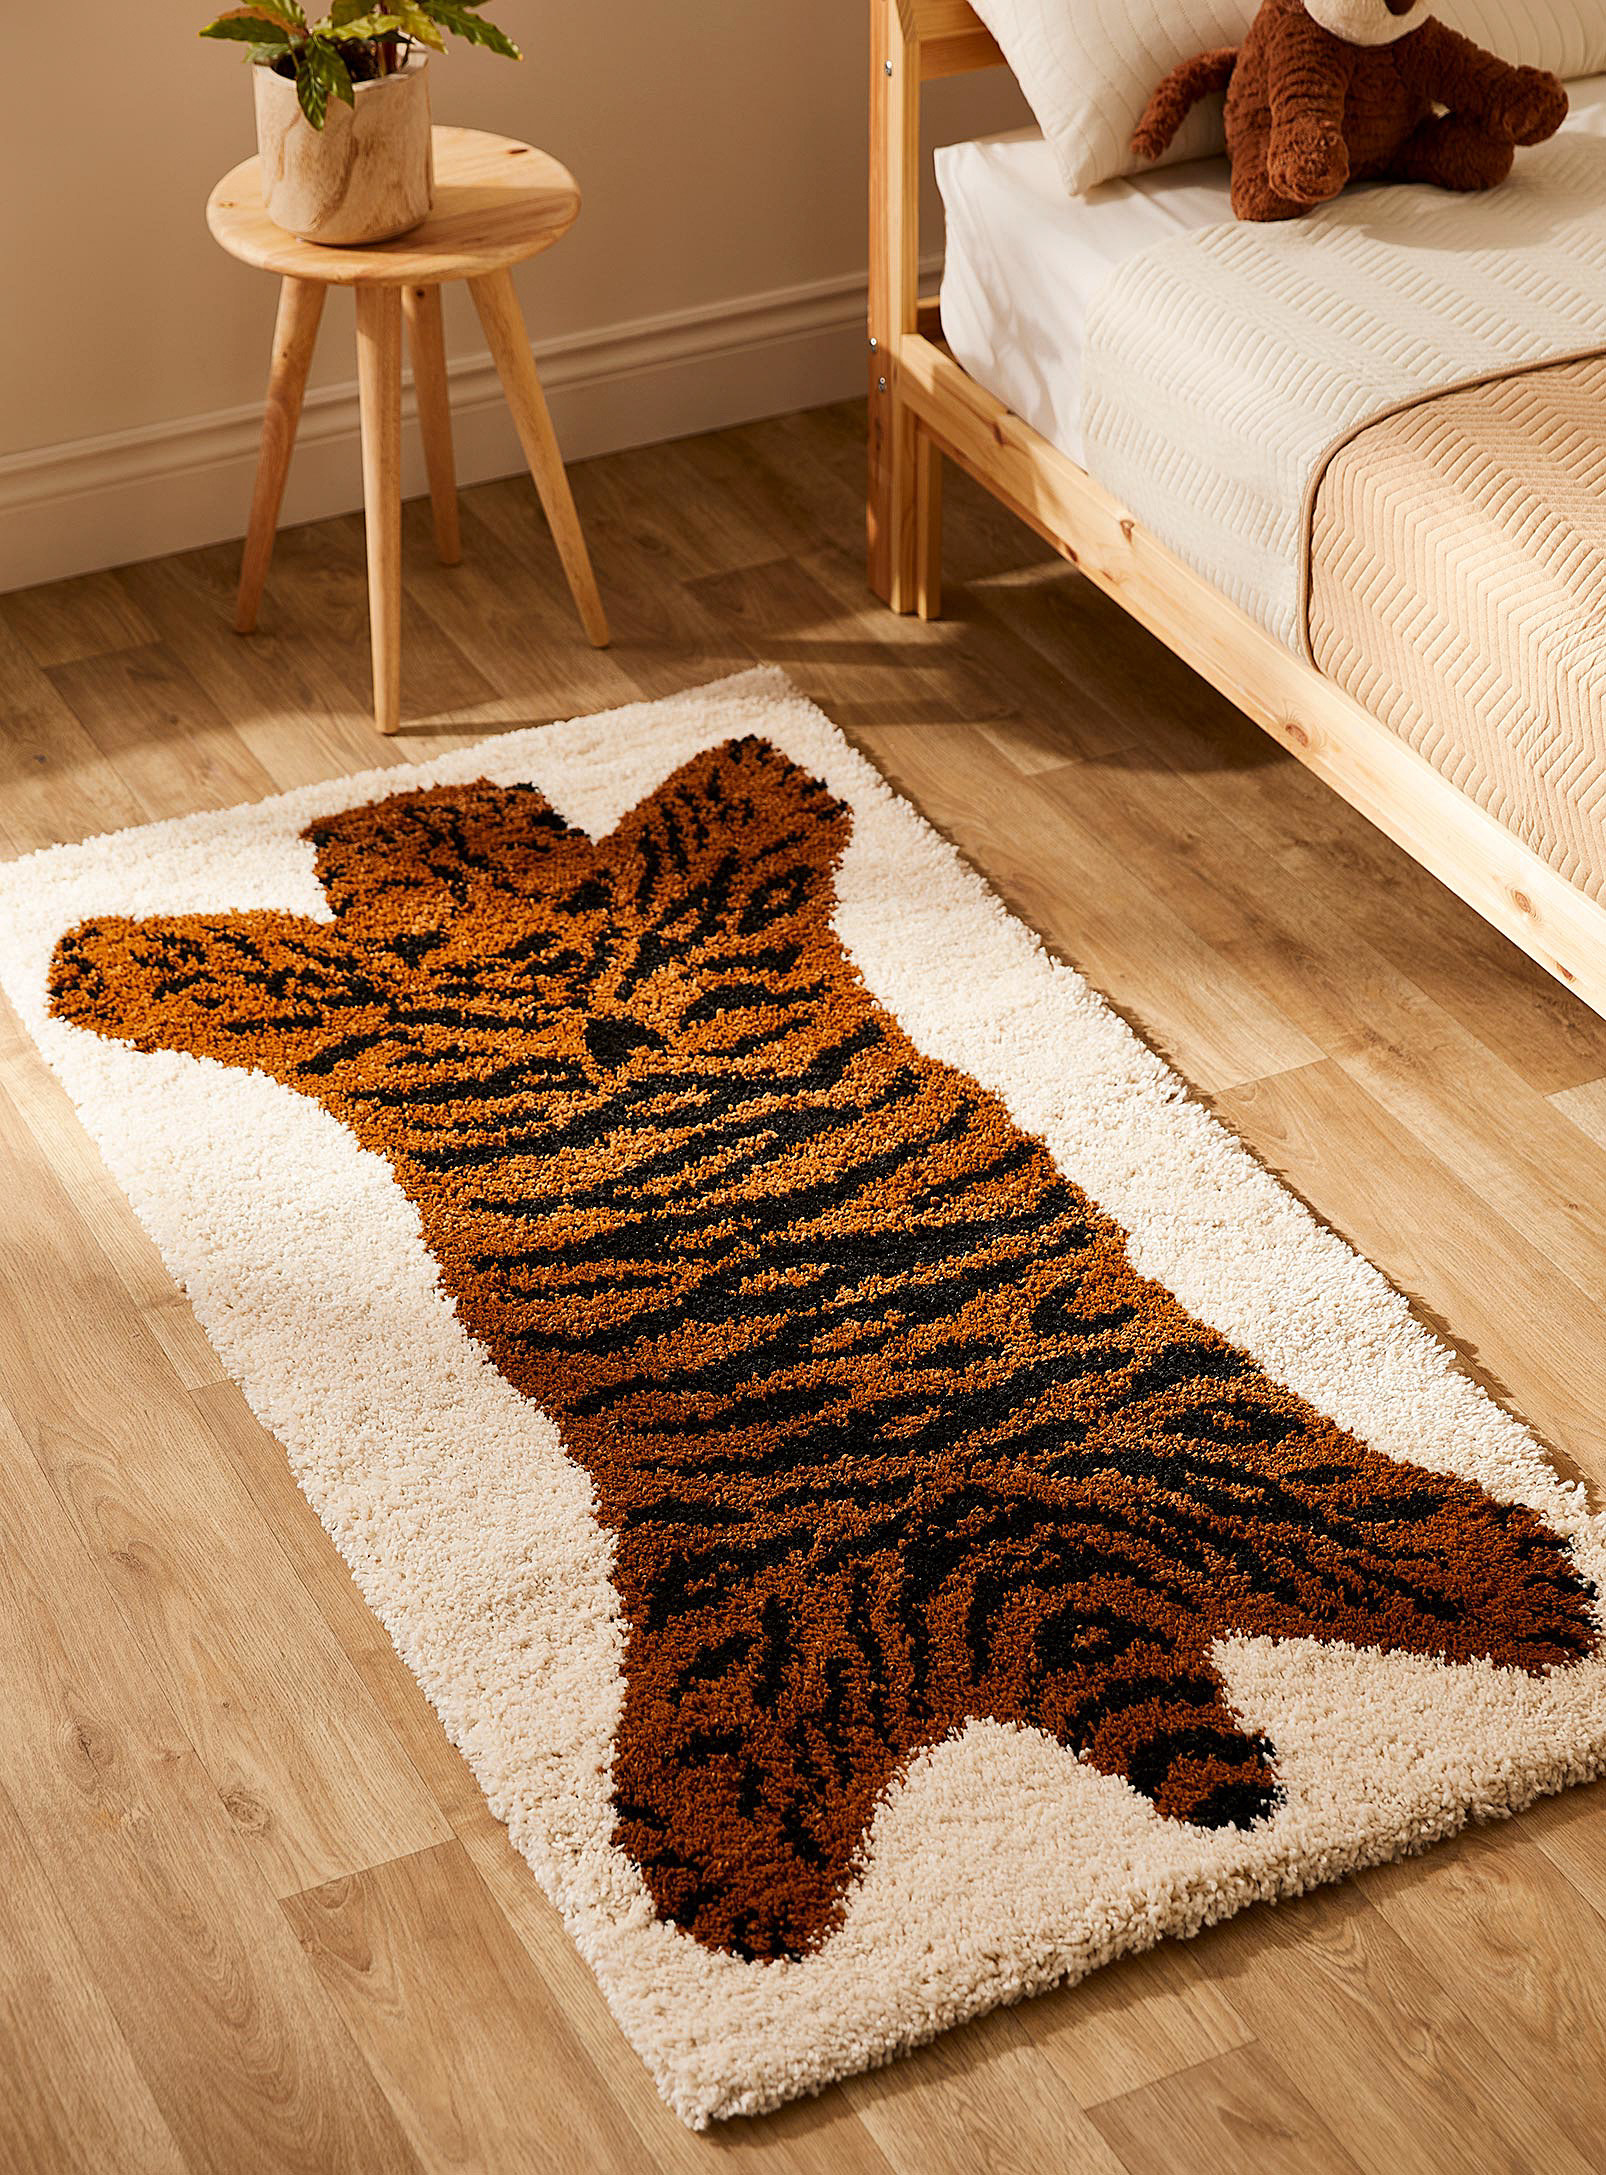 A tiger rug beside a bed